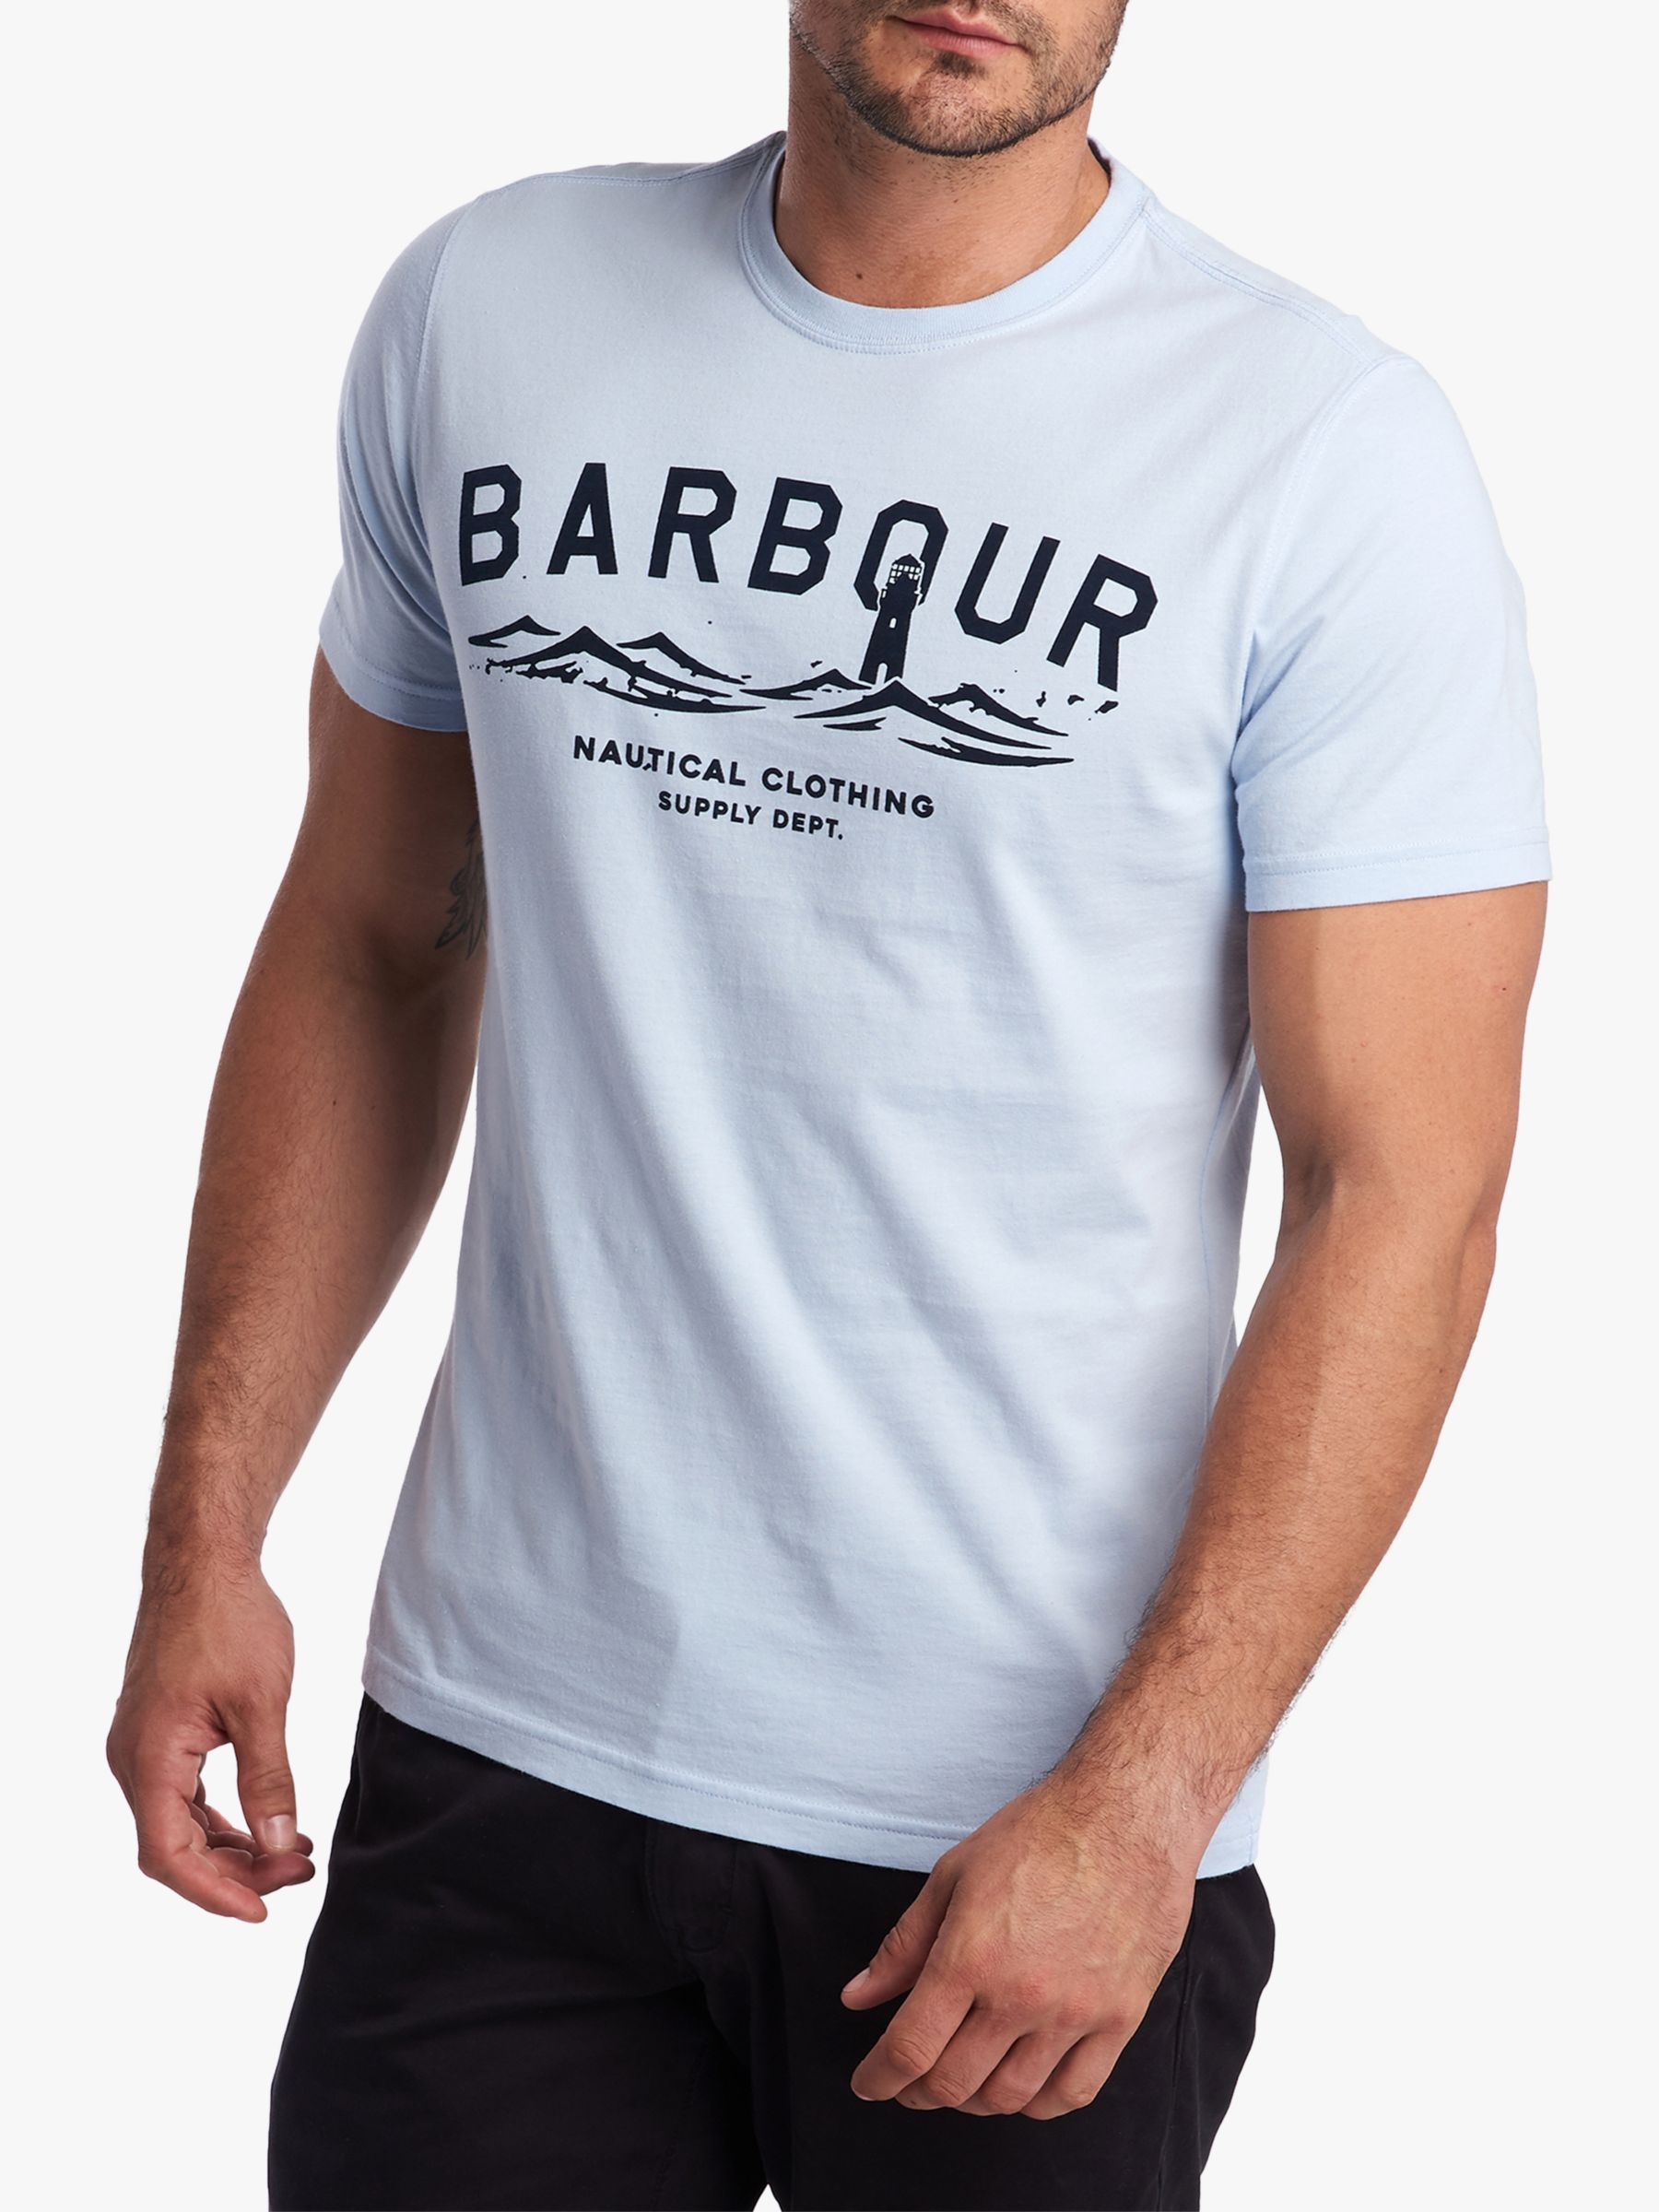 Barbour Nautical Edition Graphic T 